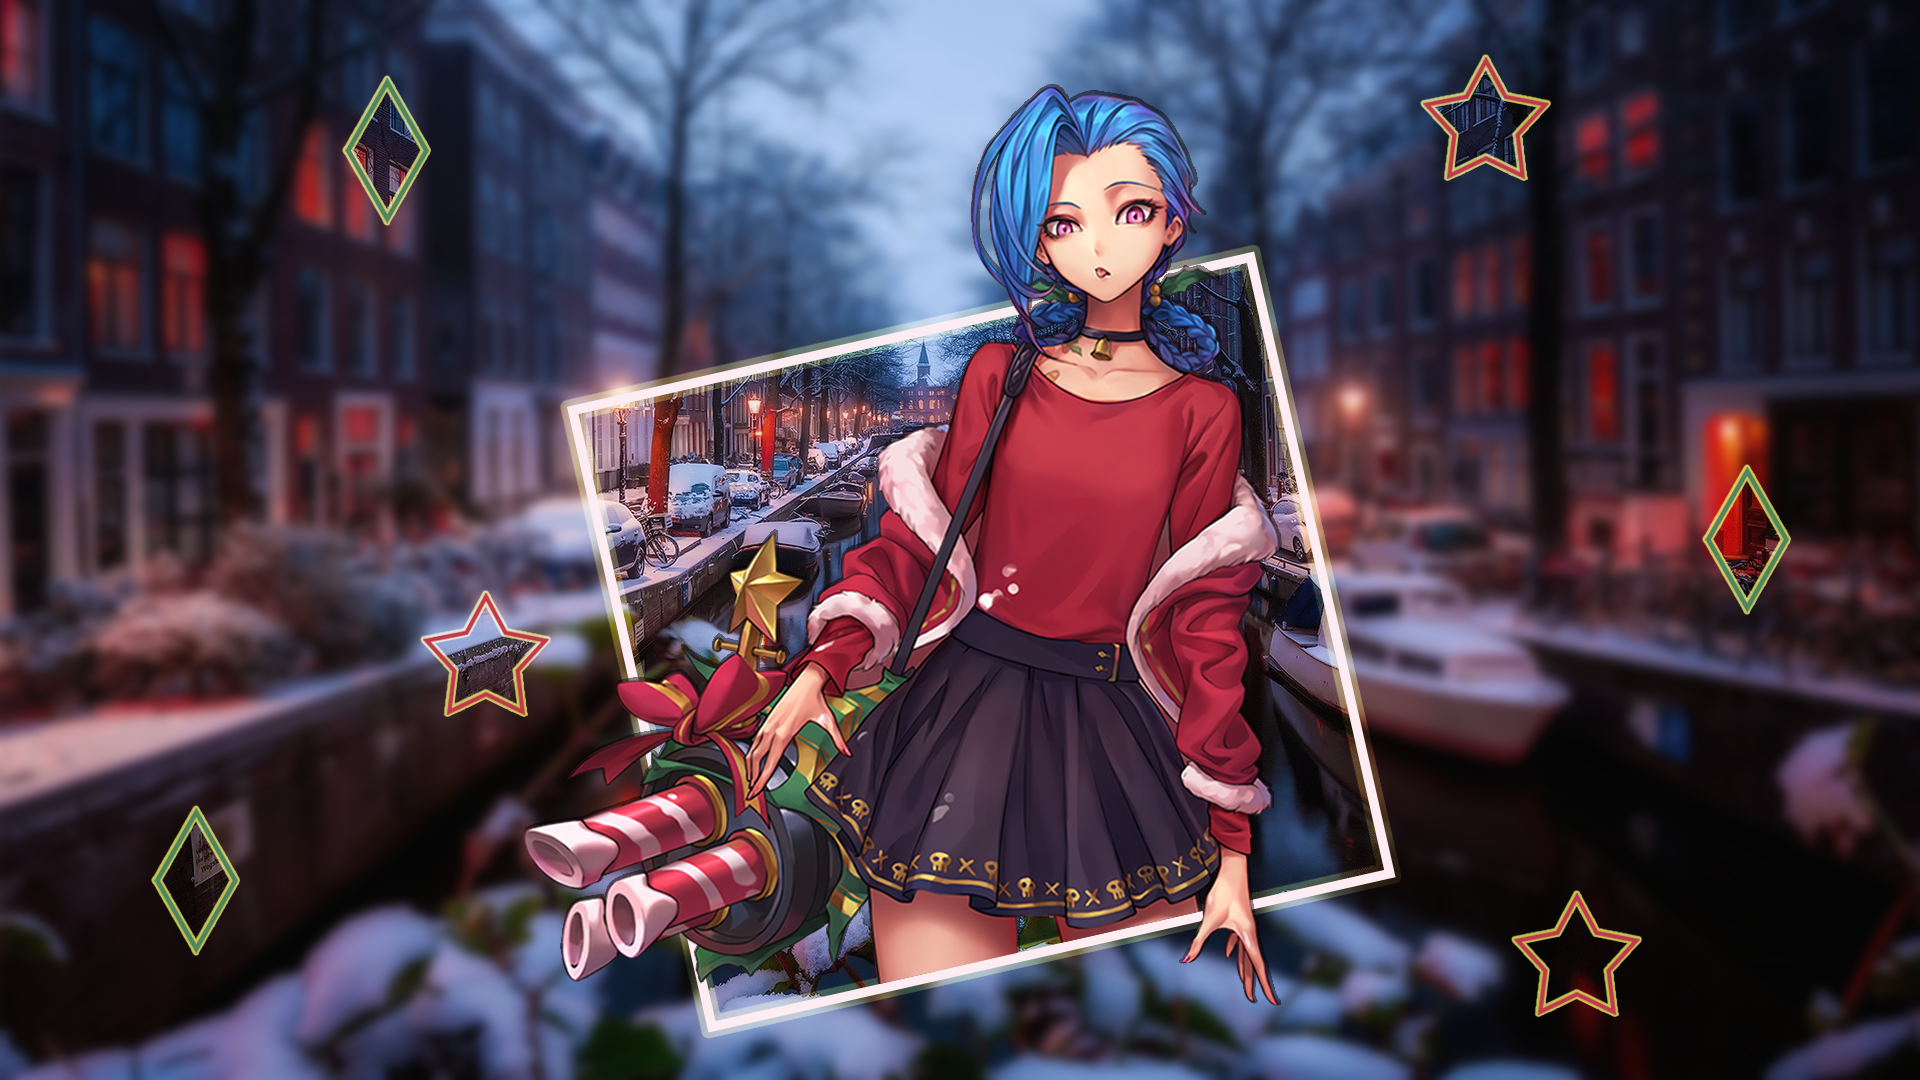 Anime 1920x1080 picture-in-picture Jinx (League of Legends) Christmas river